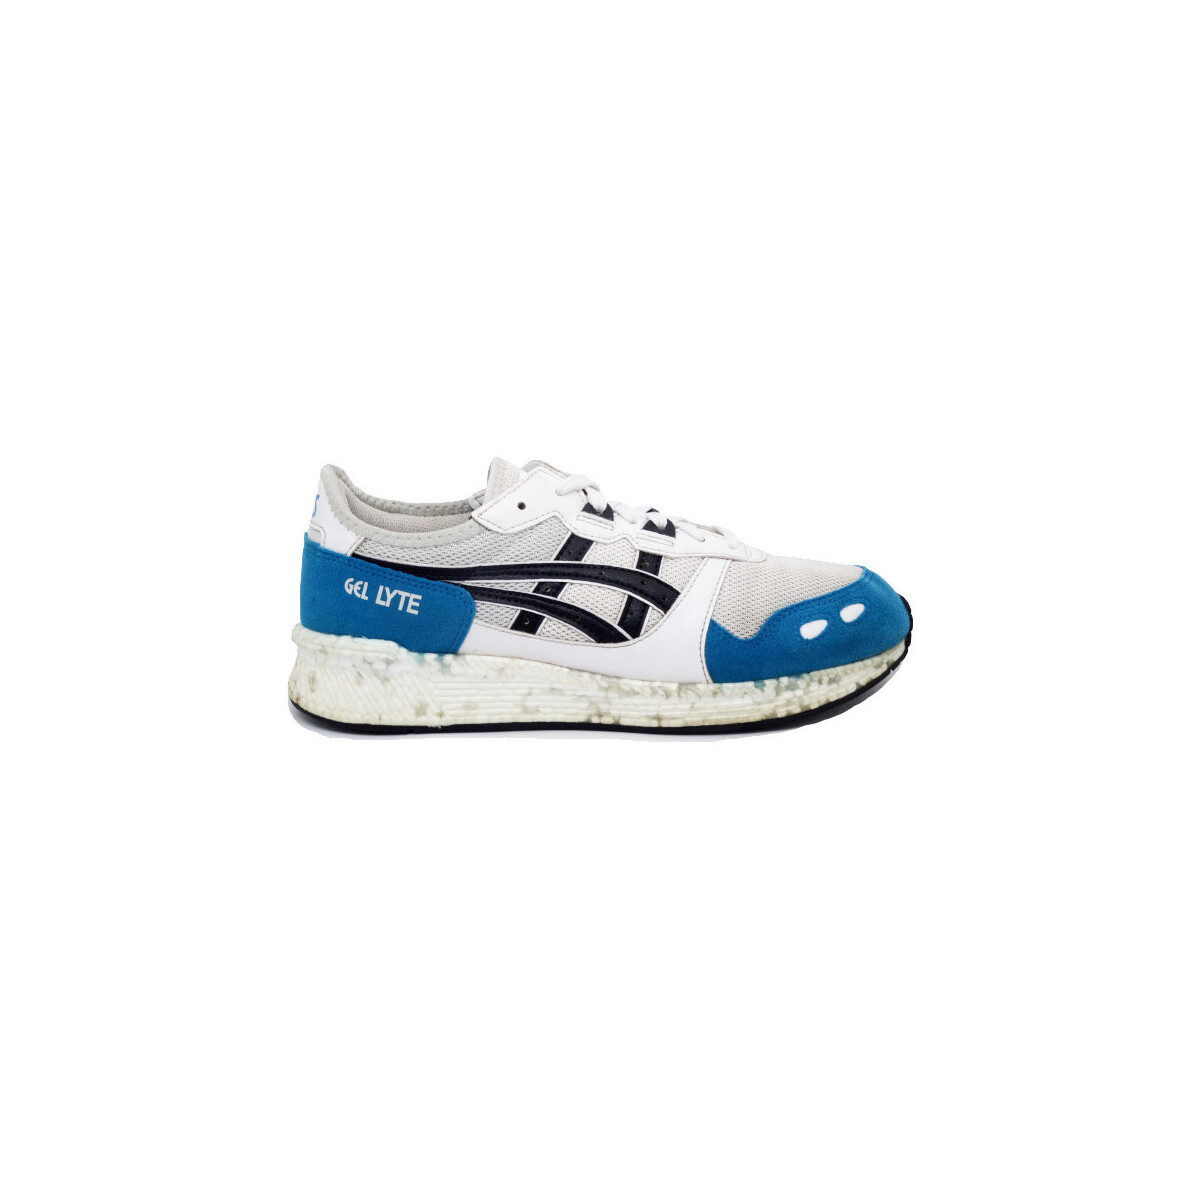 Chaussures Baskets mode Asics Reconditionné - Gel lyte tiger - Blanc